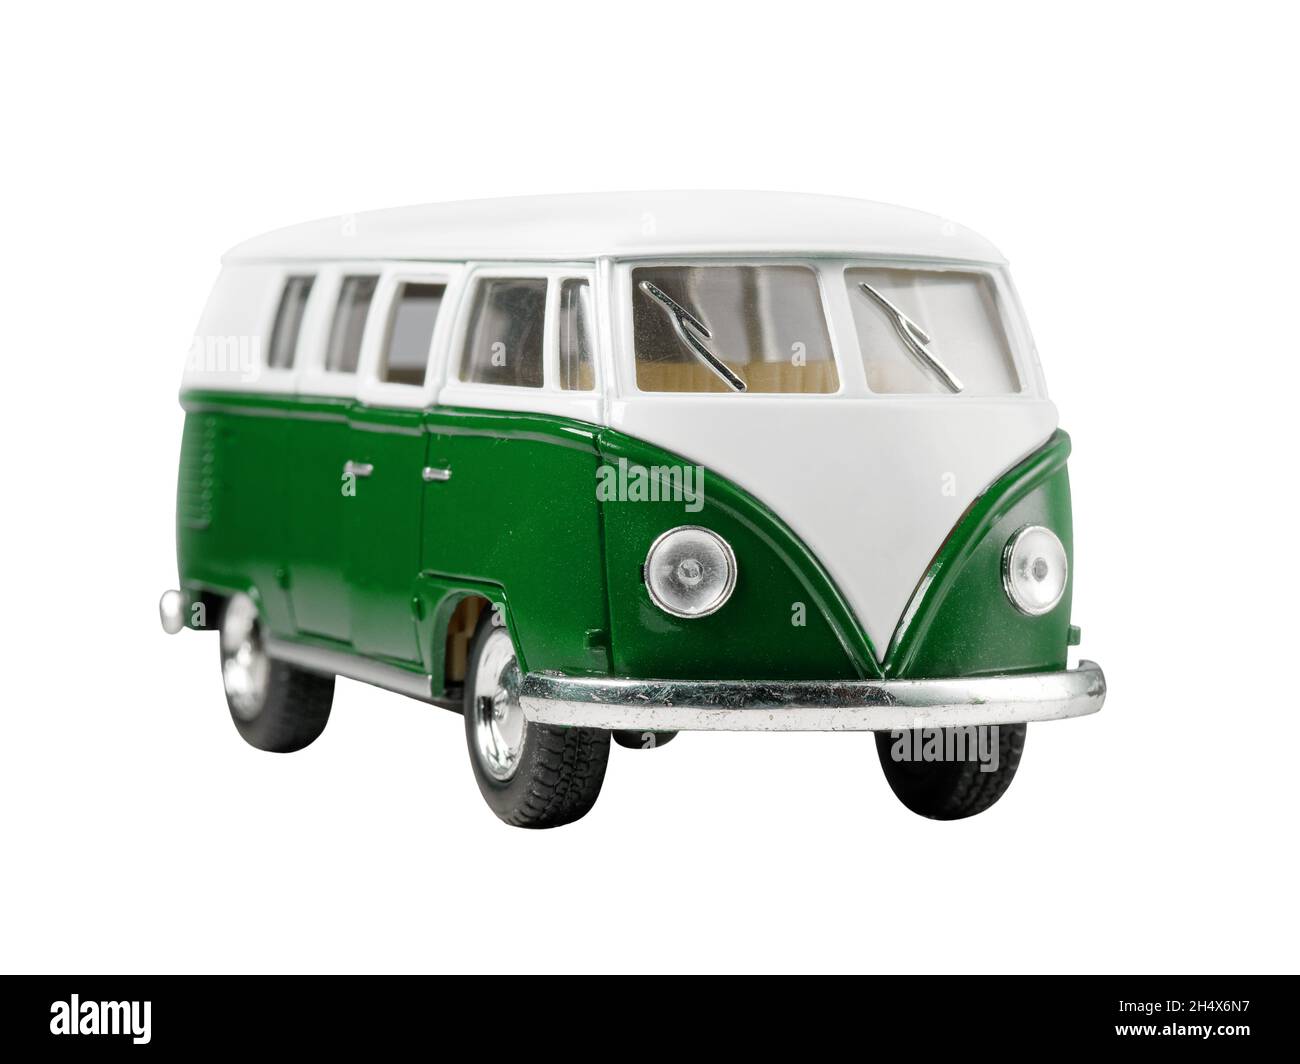 Close up of green mini van toy isolated vintage perspective view Stock Photo